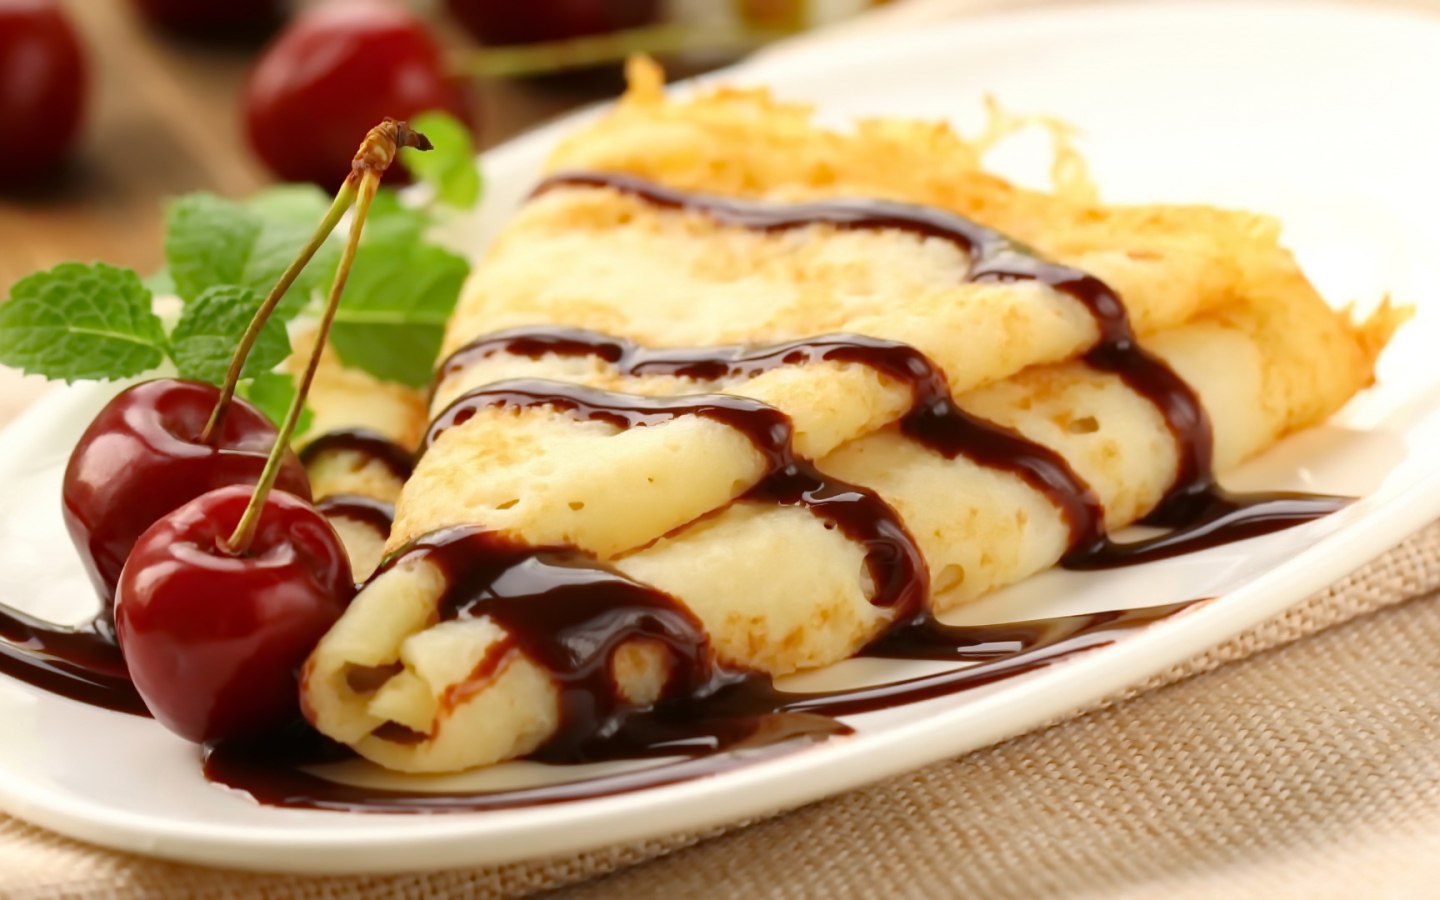 Fine pancakes with chocolate and cherries on Shrove Tuesday